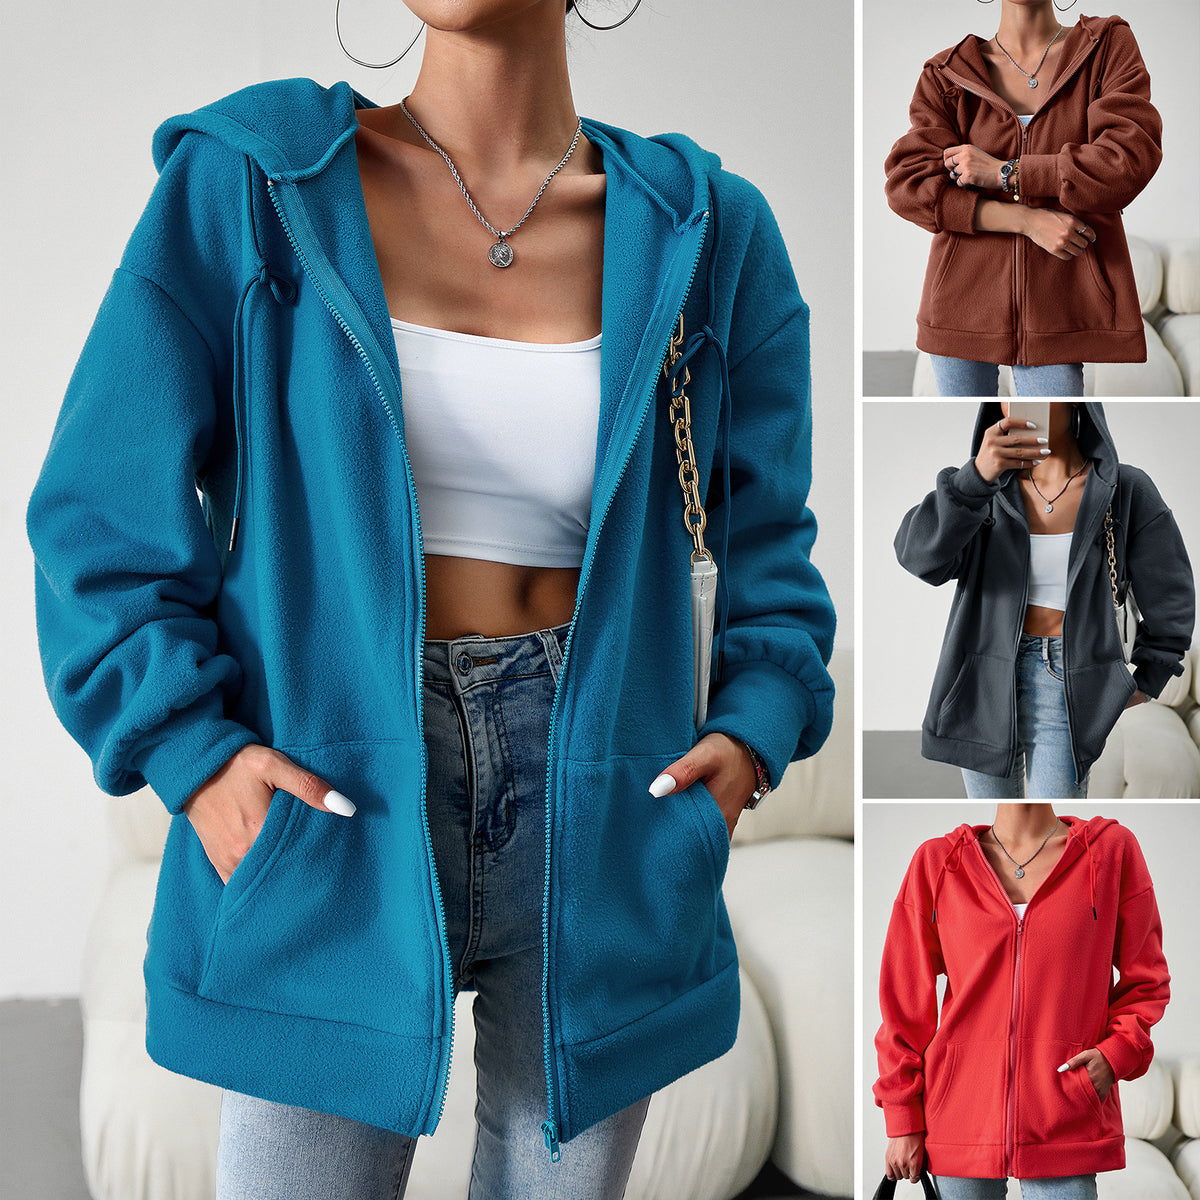 Hooded Cardigan Jacket With Pockets